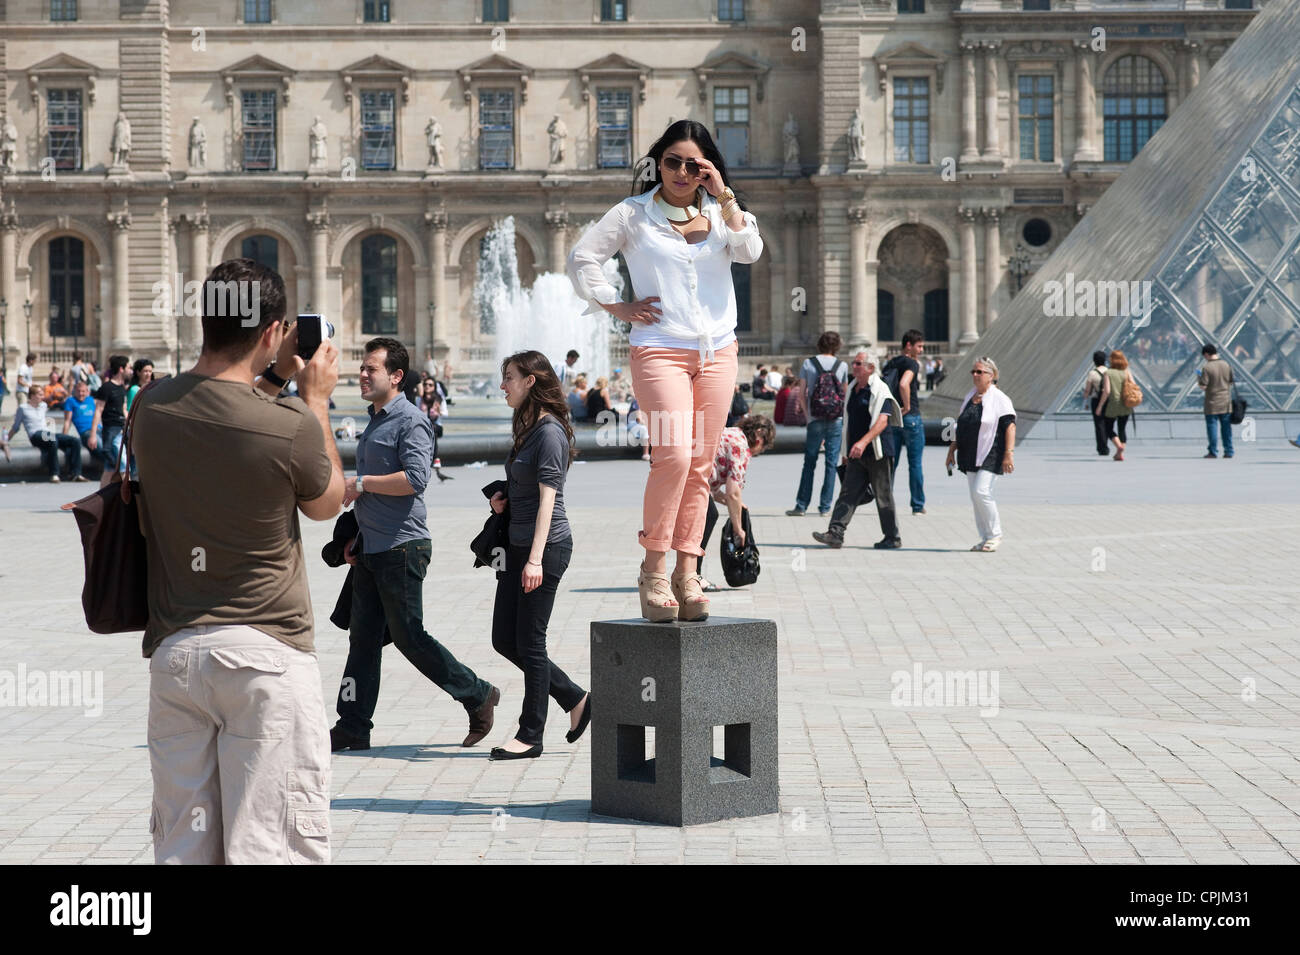 Paris, France - A  female tourist  posing in front of the Louvre museum. Stock Photo